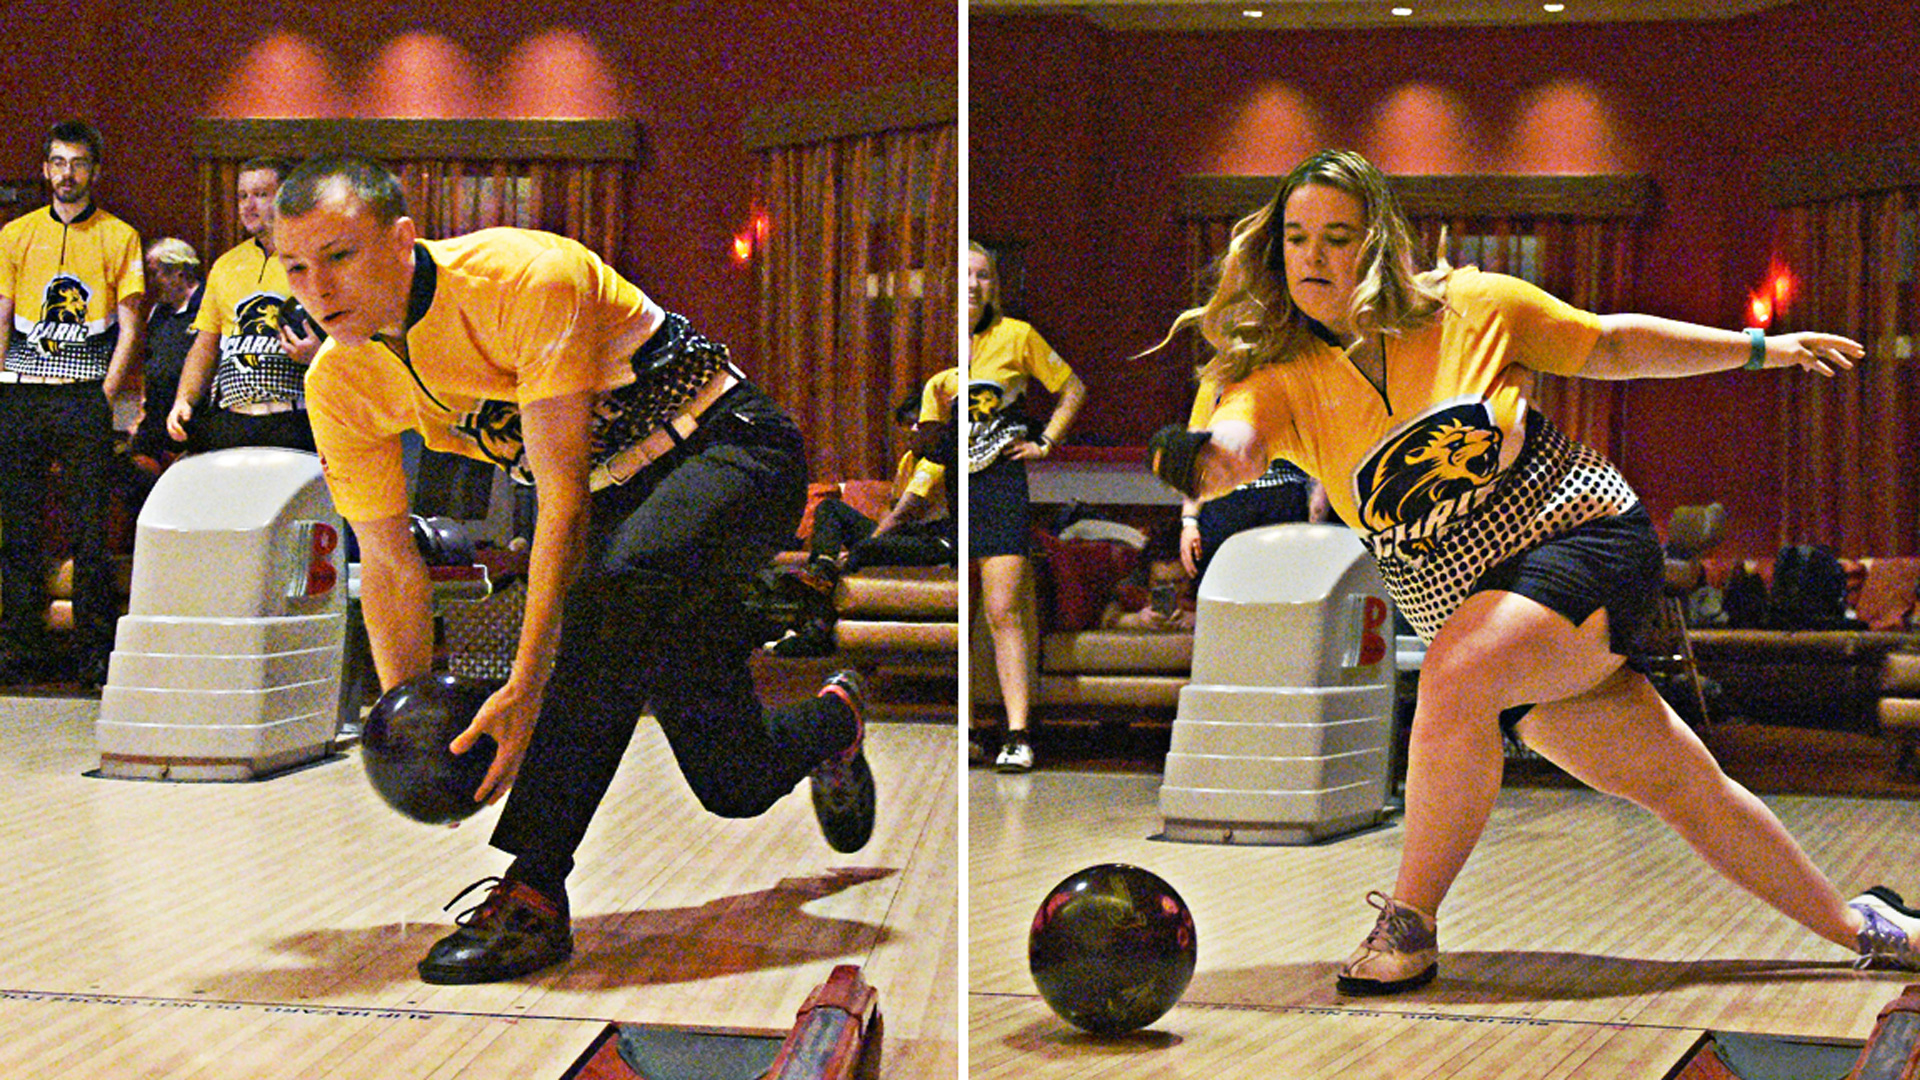 Pride bowling wraps up October with Five Seasons Classic